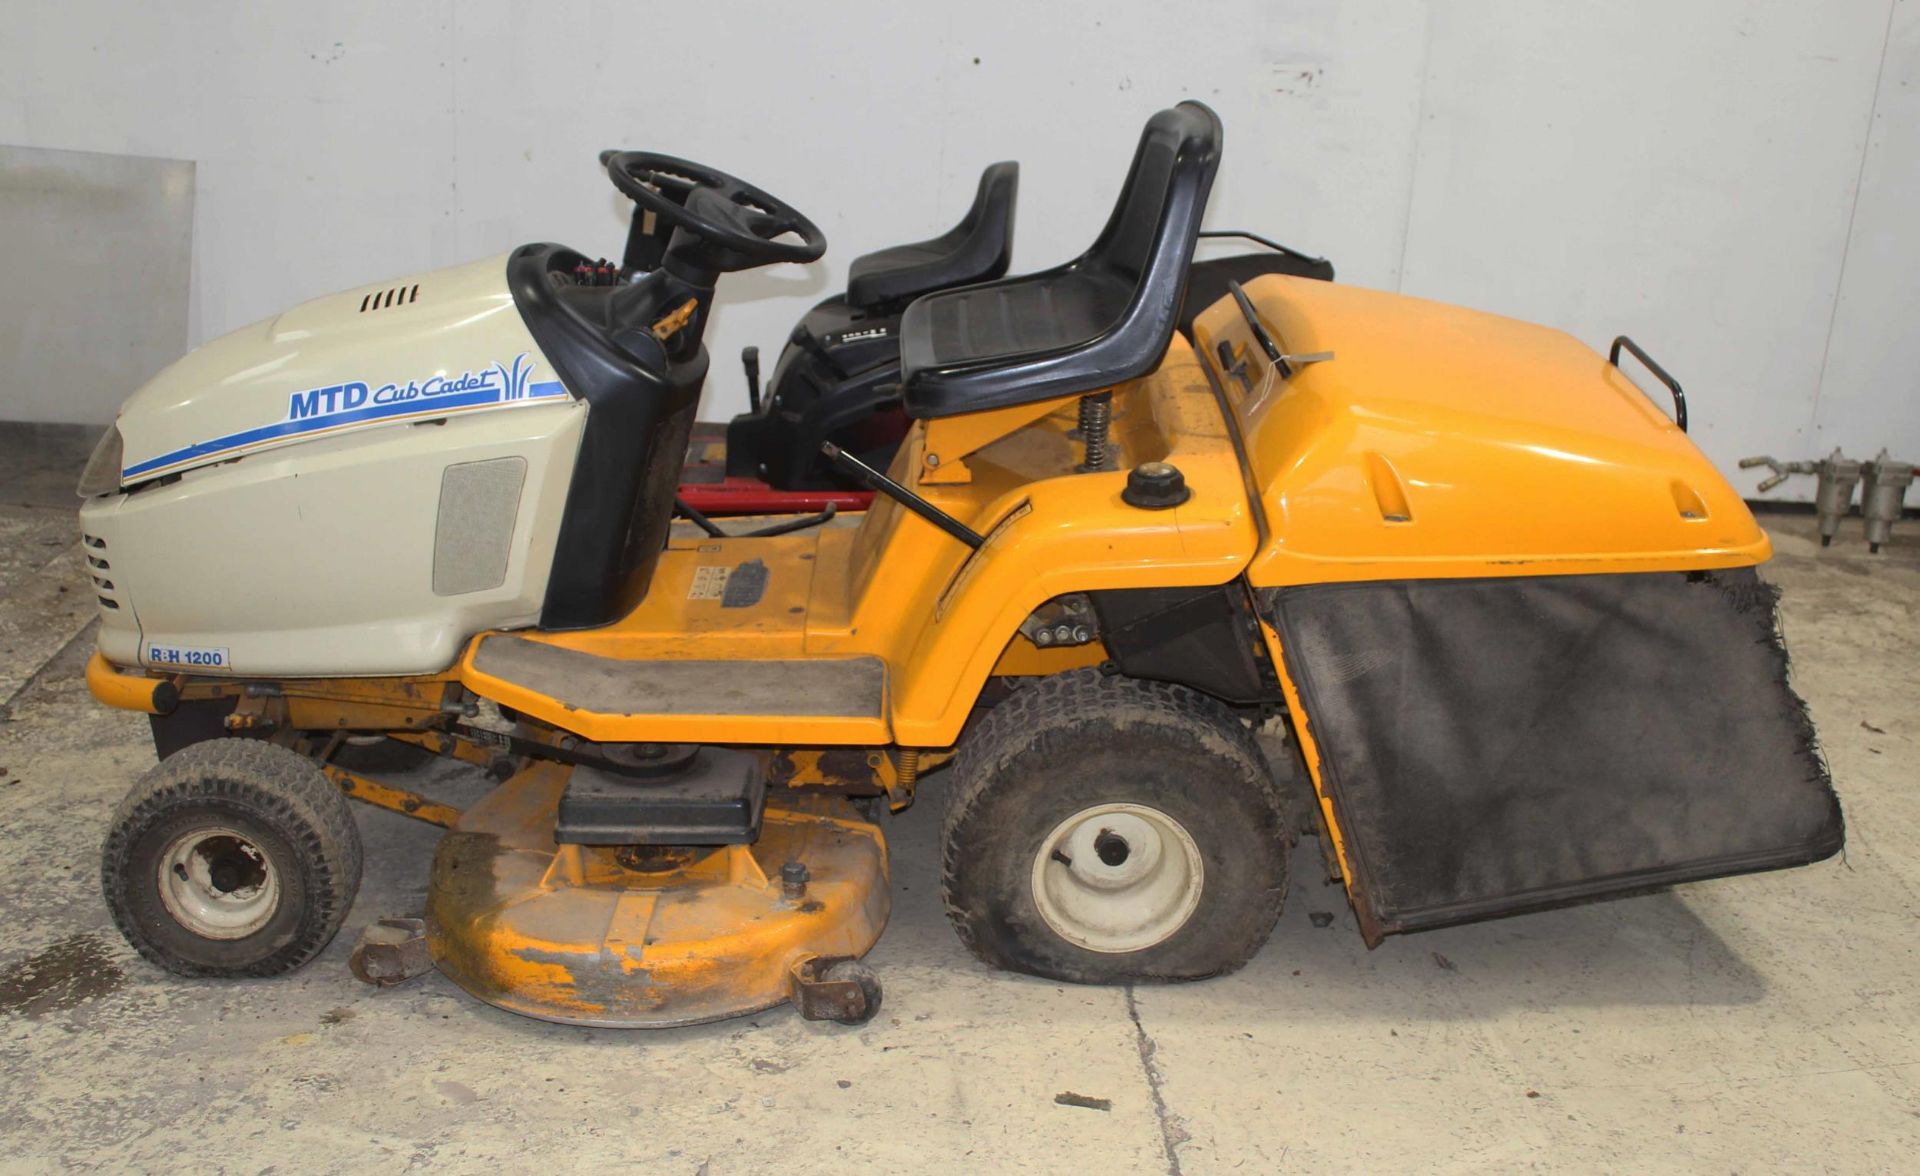 MTD CUB CADET RIDE ON MOWER WITH BRIGGS & STRATTON VANGUARD V-TWIN 20HP ENGINE + VAT KEY IN OFFICE